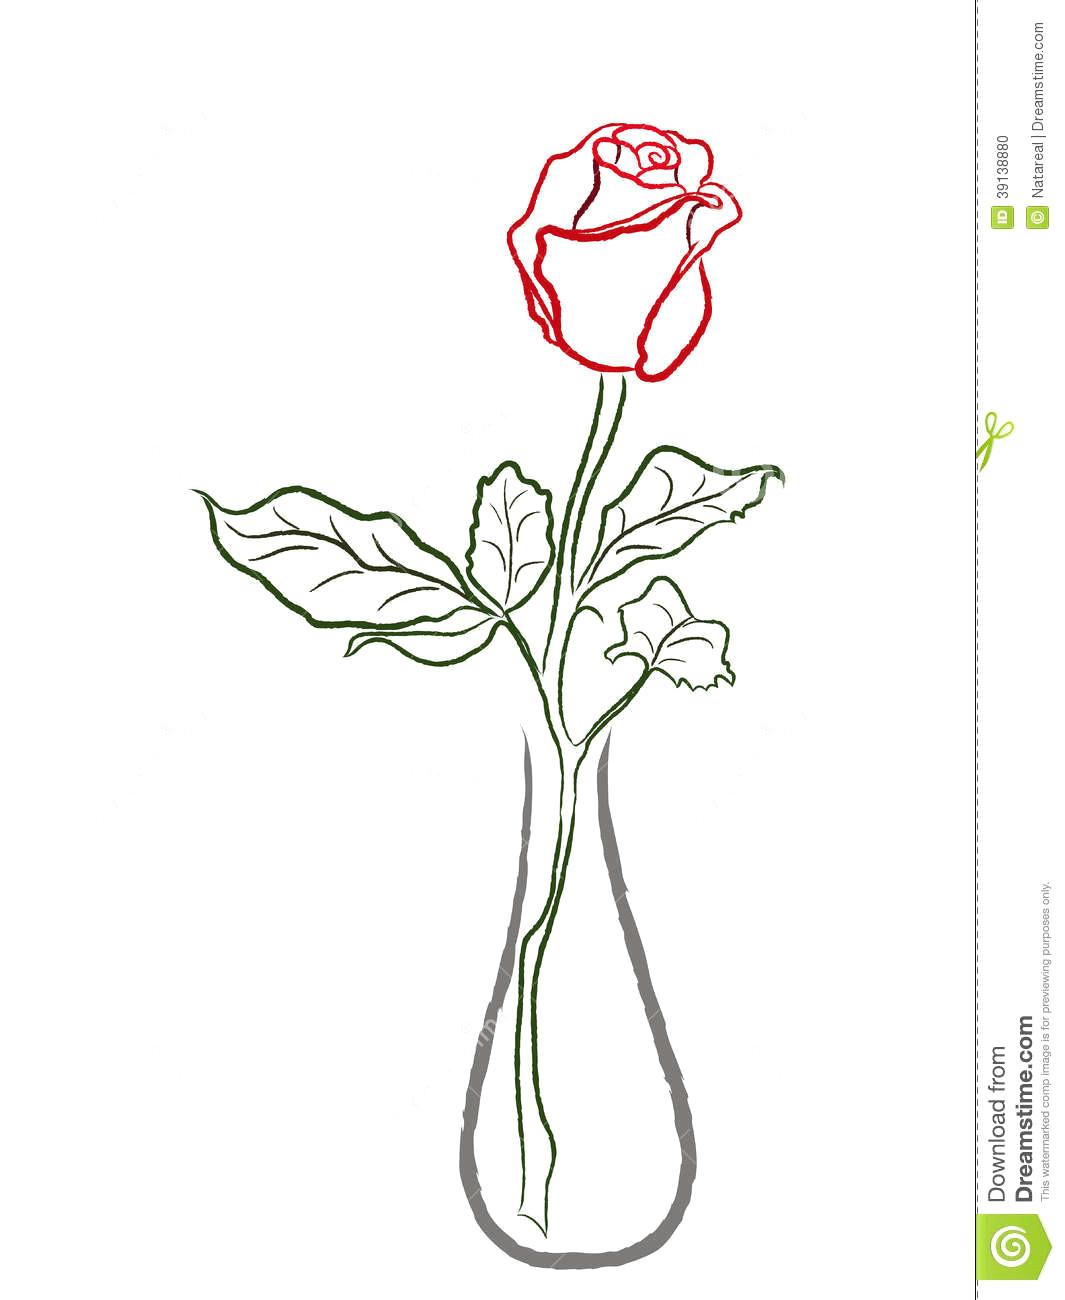 pictures of roses to draw awesome drawn vase red rose 3h vases how to draw roses